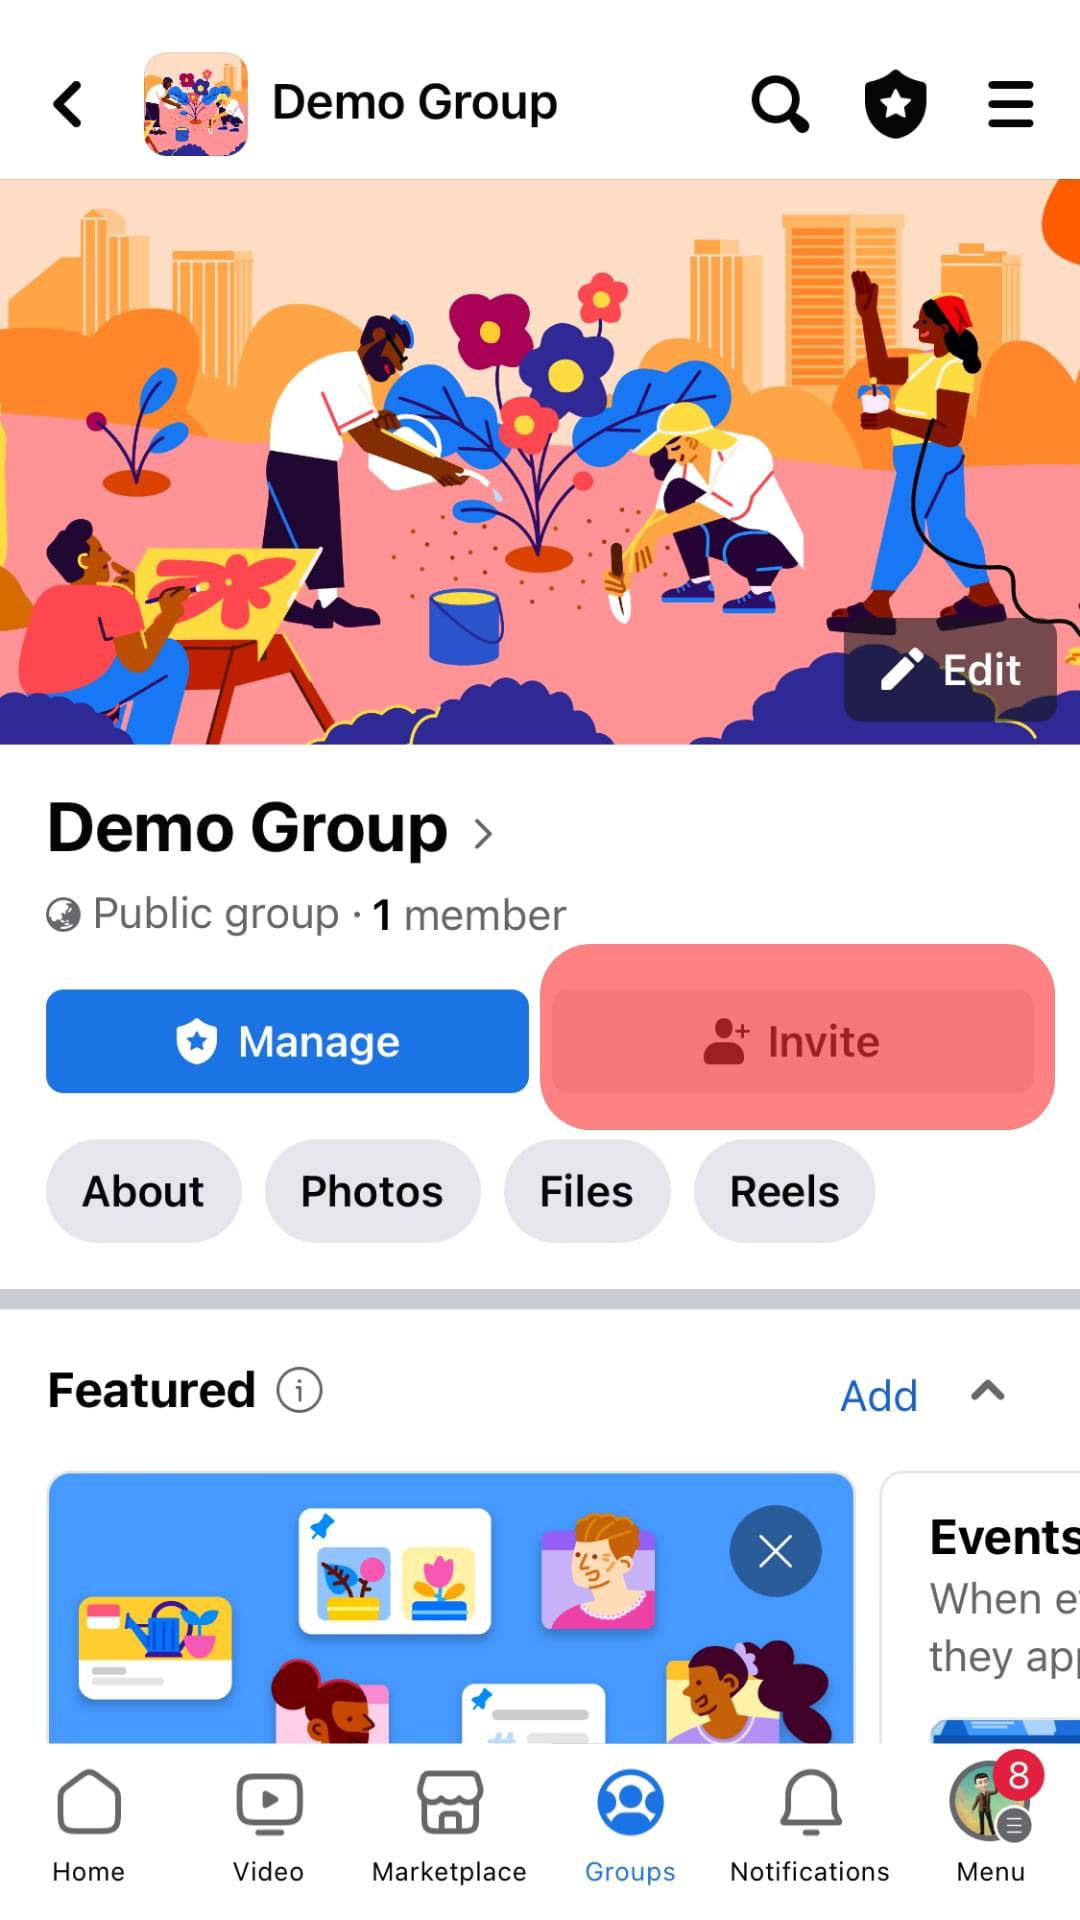 Tap + Invite Beside Group Name